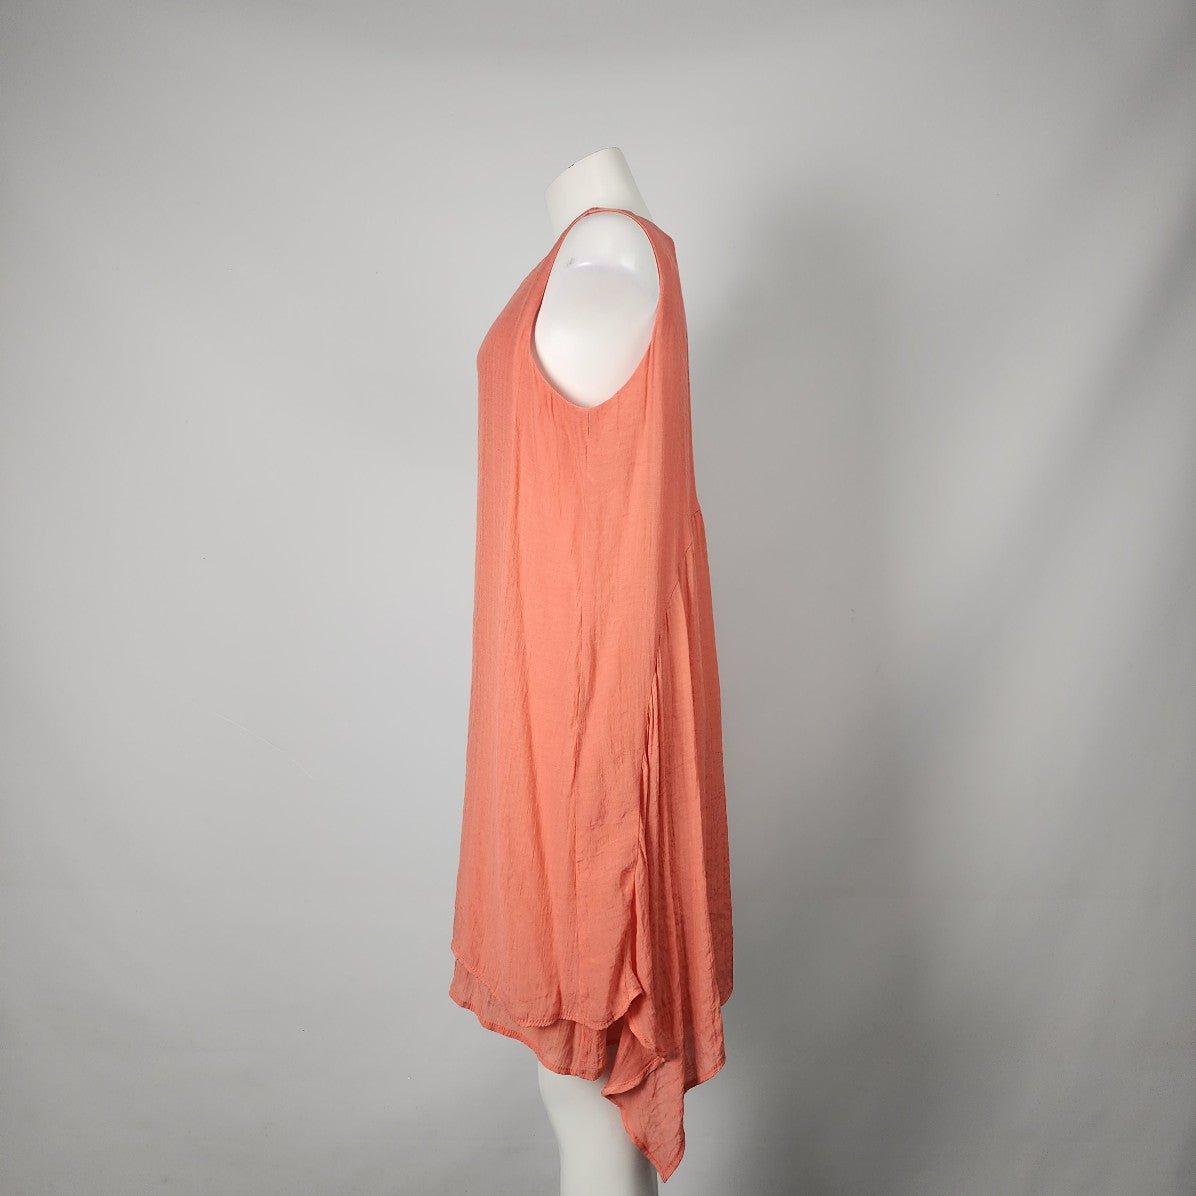 Fever Coral Knee Length Sleeveless Dress Size L